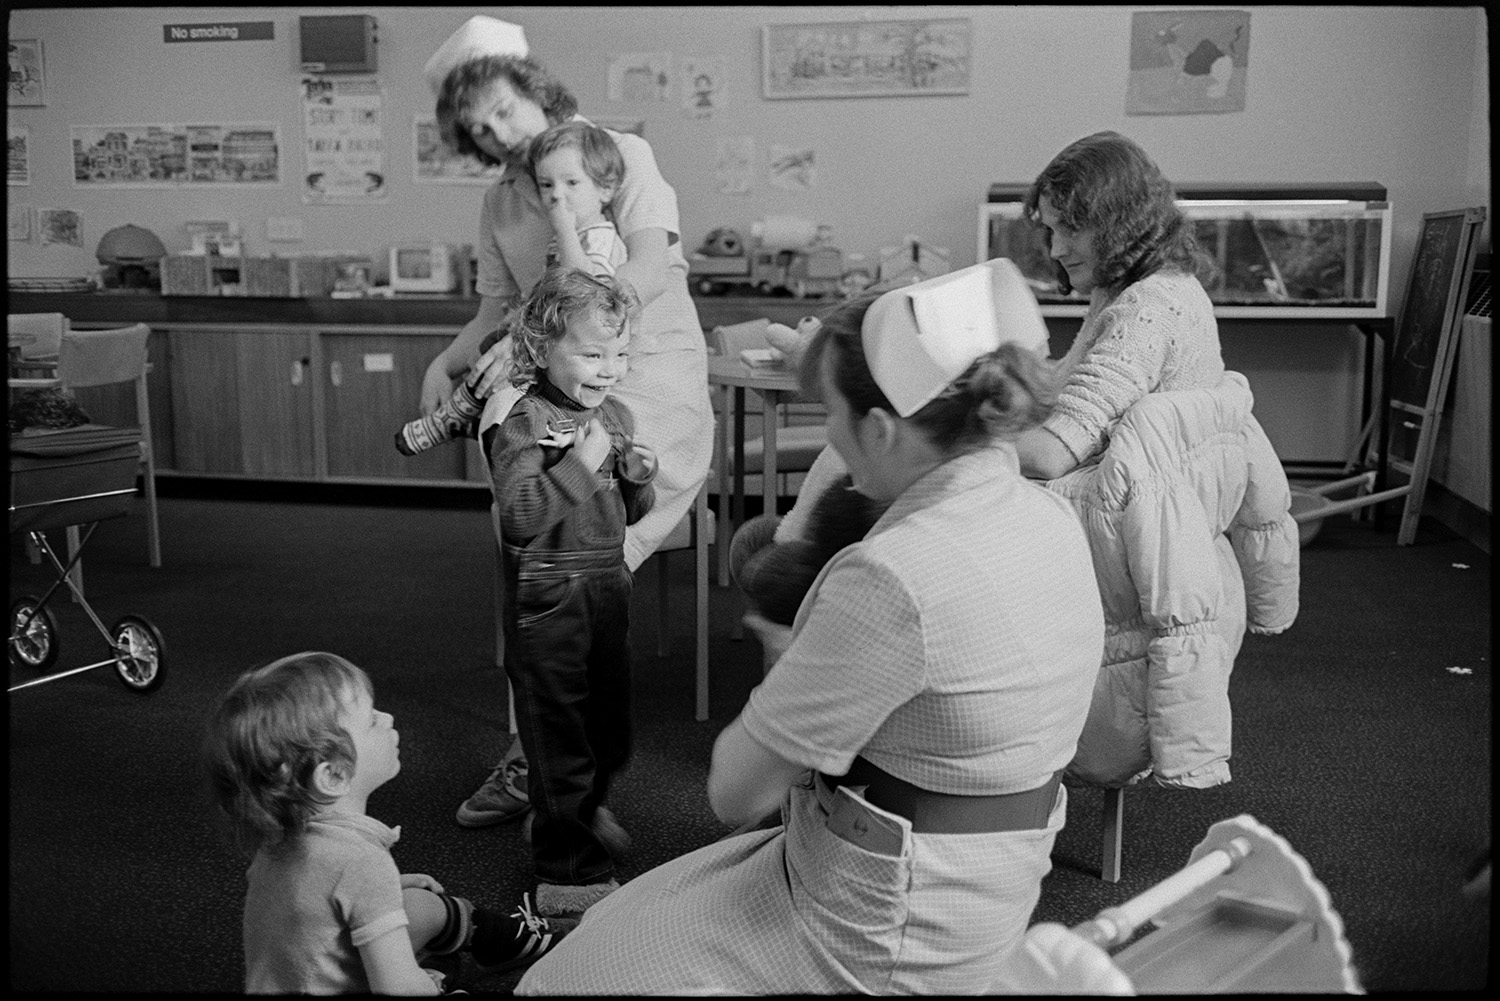 Hospital children's ward, nurses, mothers with children in wards, Sister at ward, cuddly toys. 
[Two nurses and a woman playing with children in a room on the Children's Ward at Barnstaple General Hospital. Toys and posters are visible in the room.]